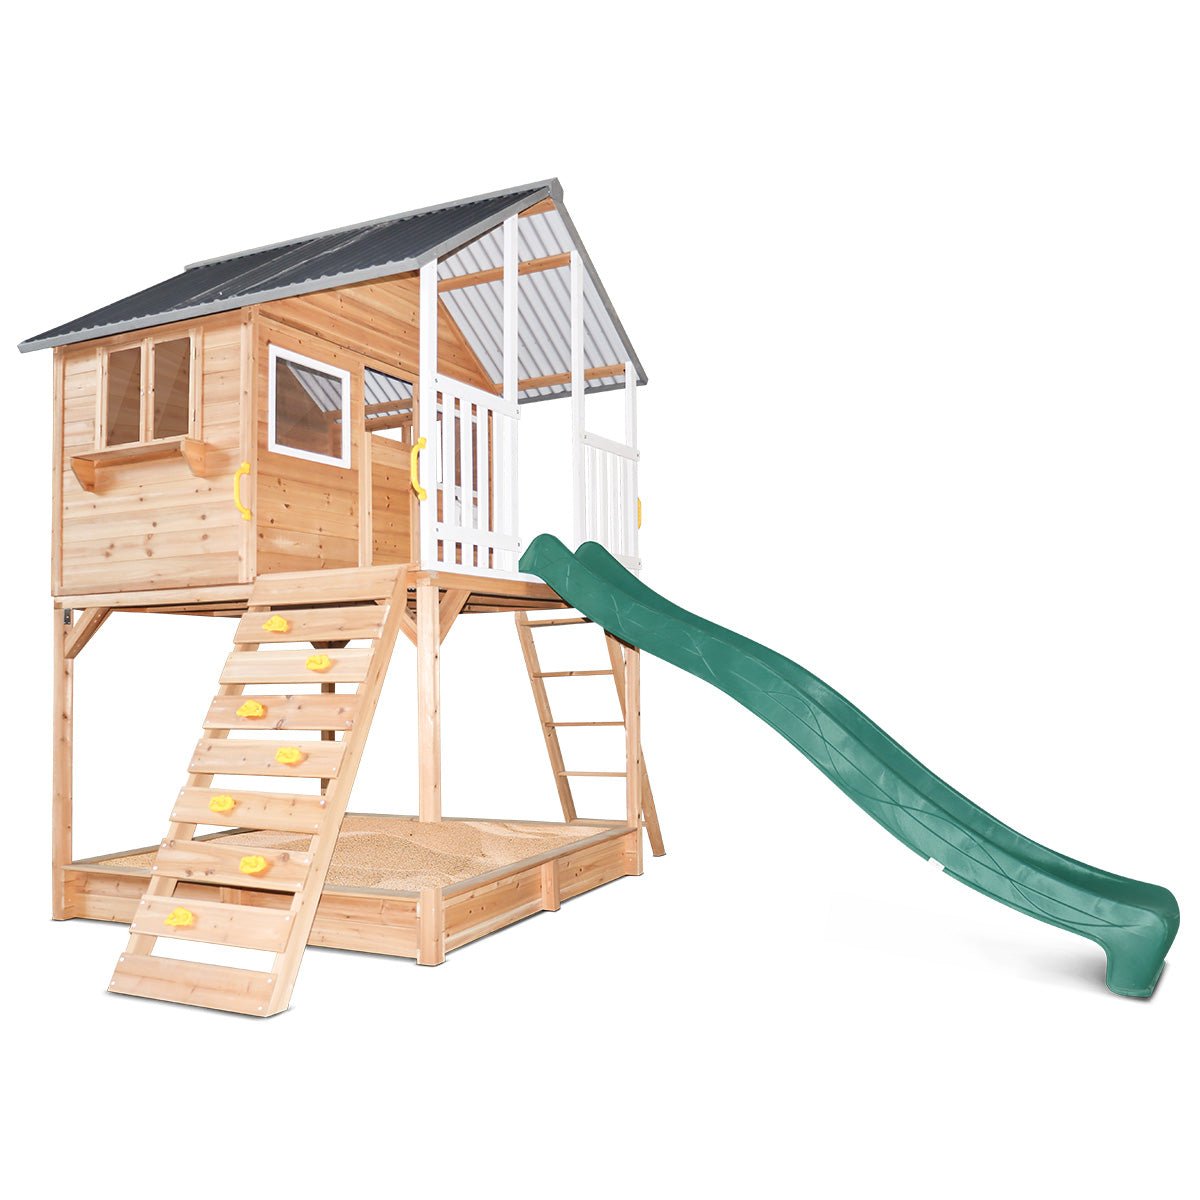 Winchester Cubby House with Elevation Platform with Green Slide - Kids Mega Mart